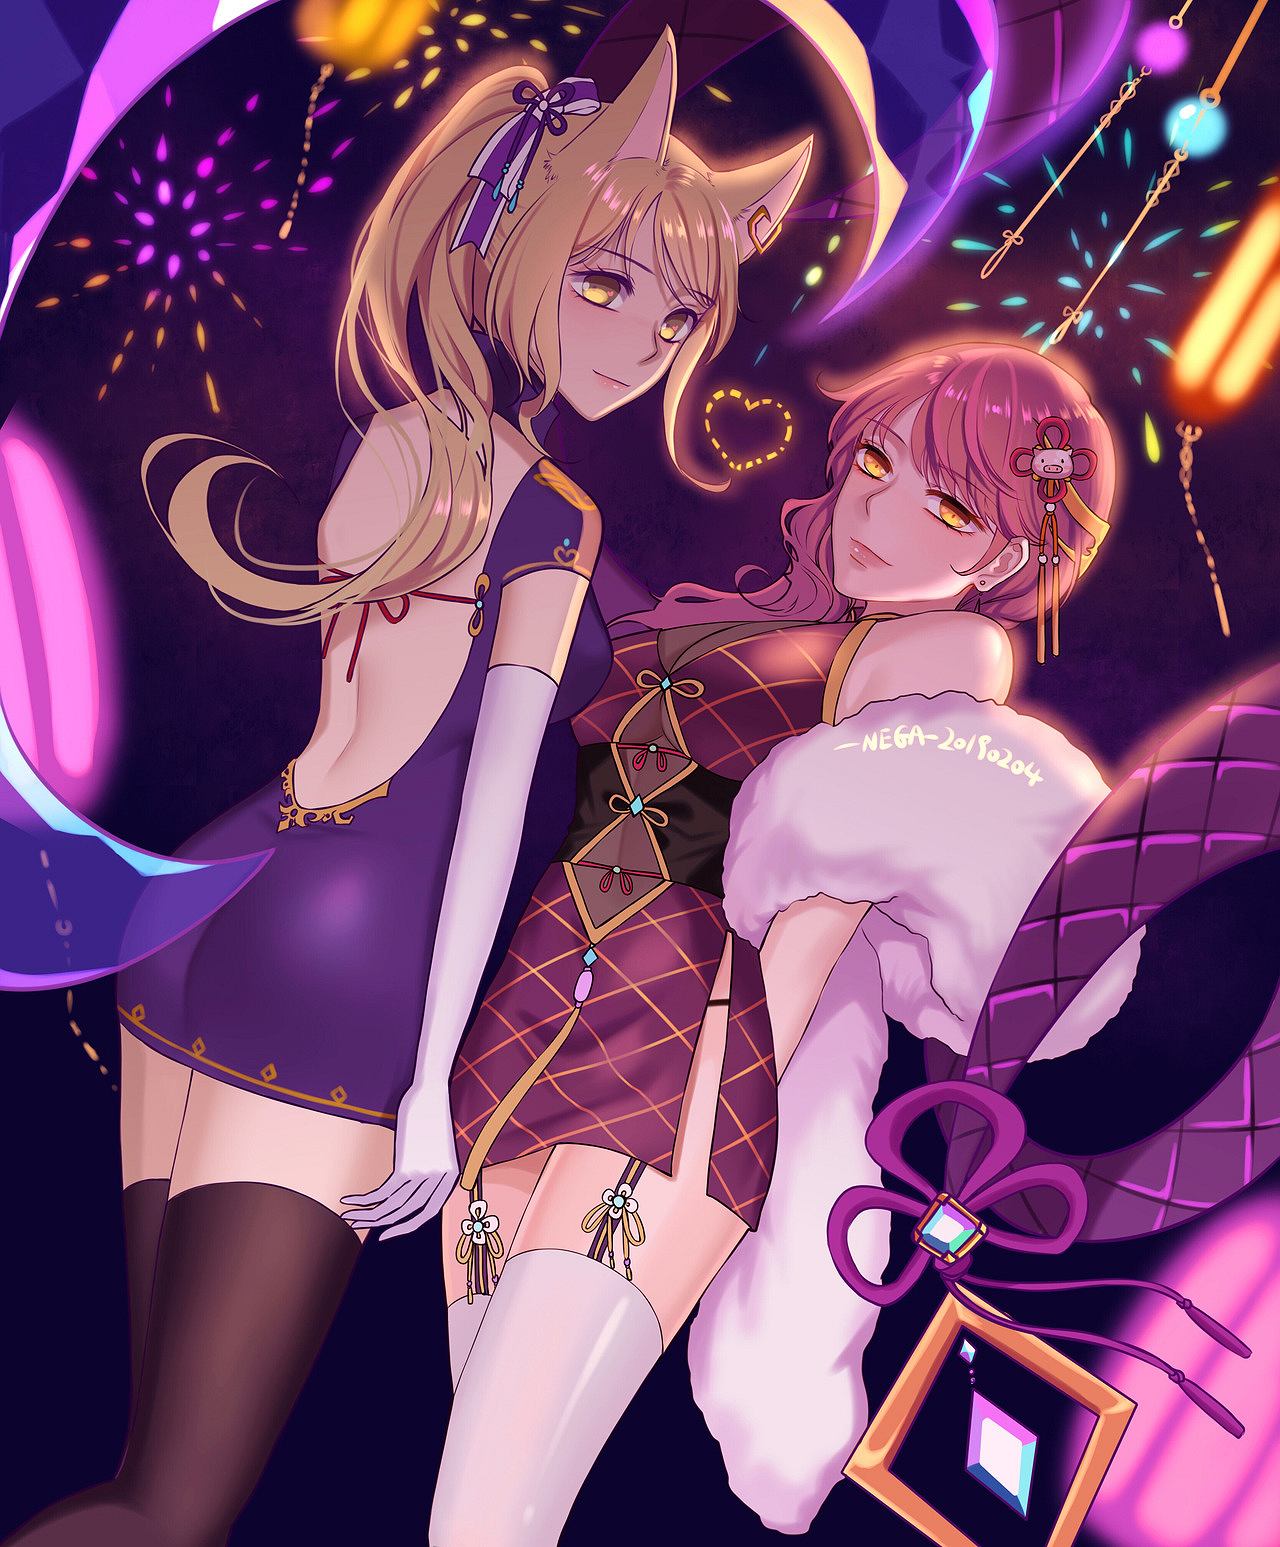 Two beautiful girls: Ahri and Evelynn: League of Legends (Artist: -NEGA-)